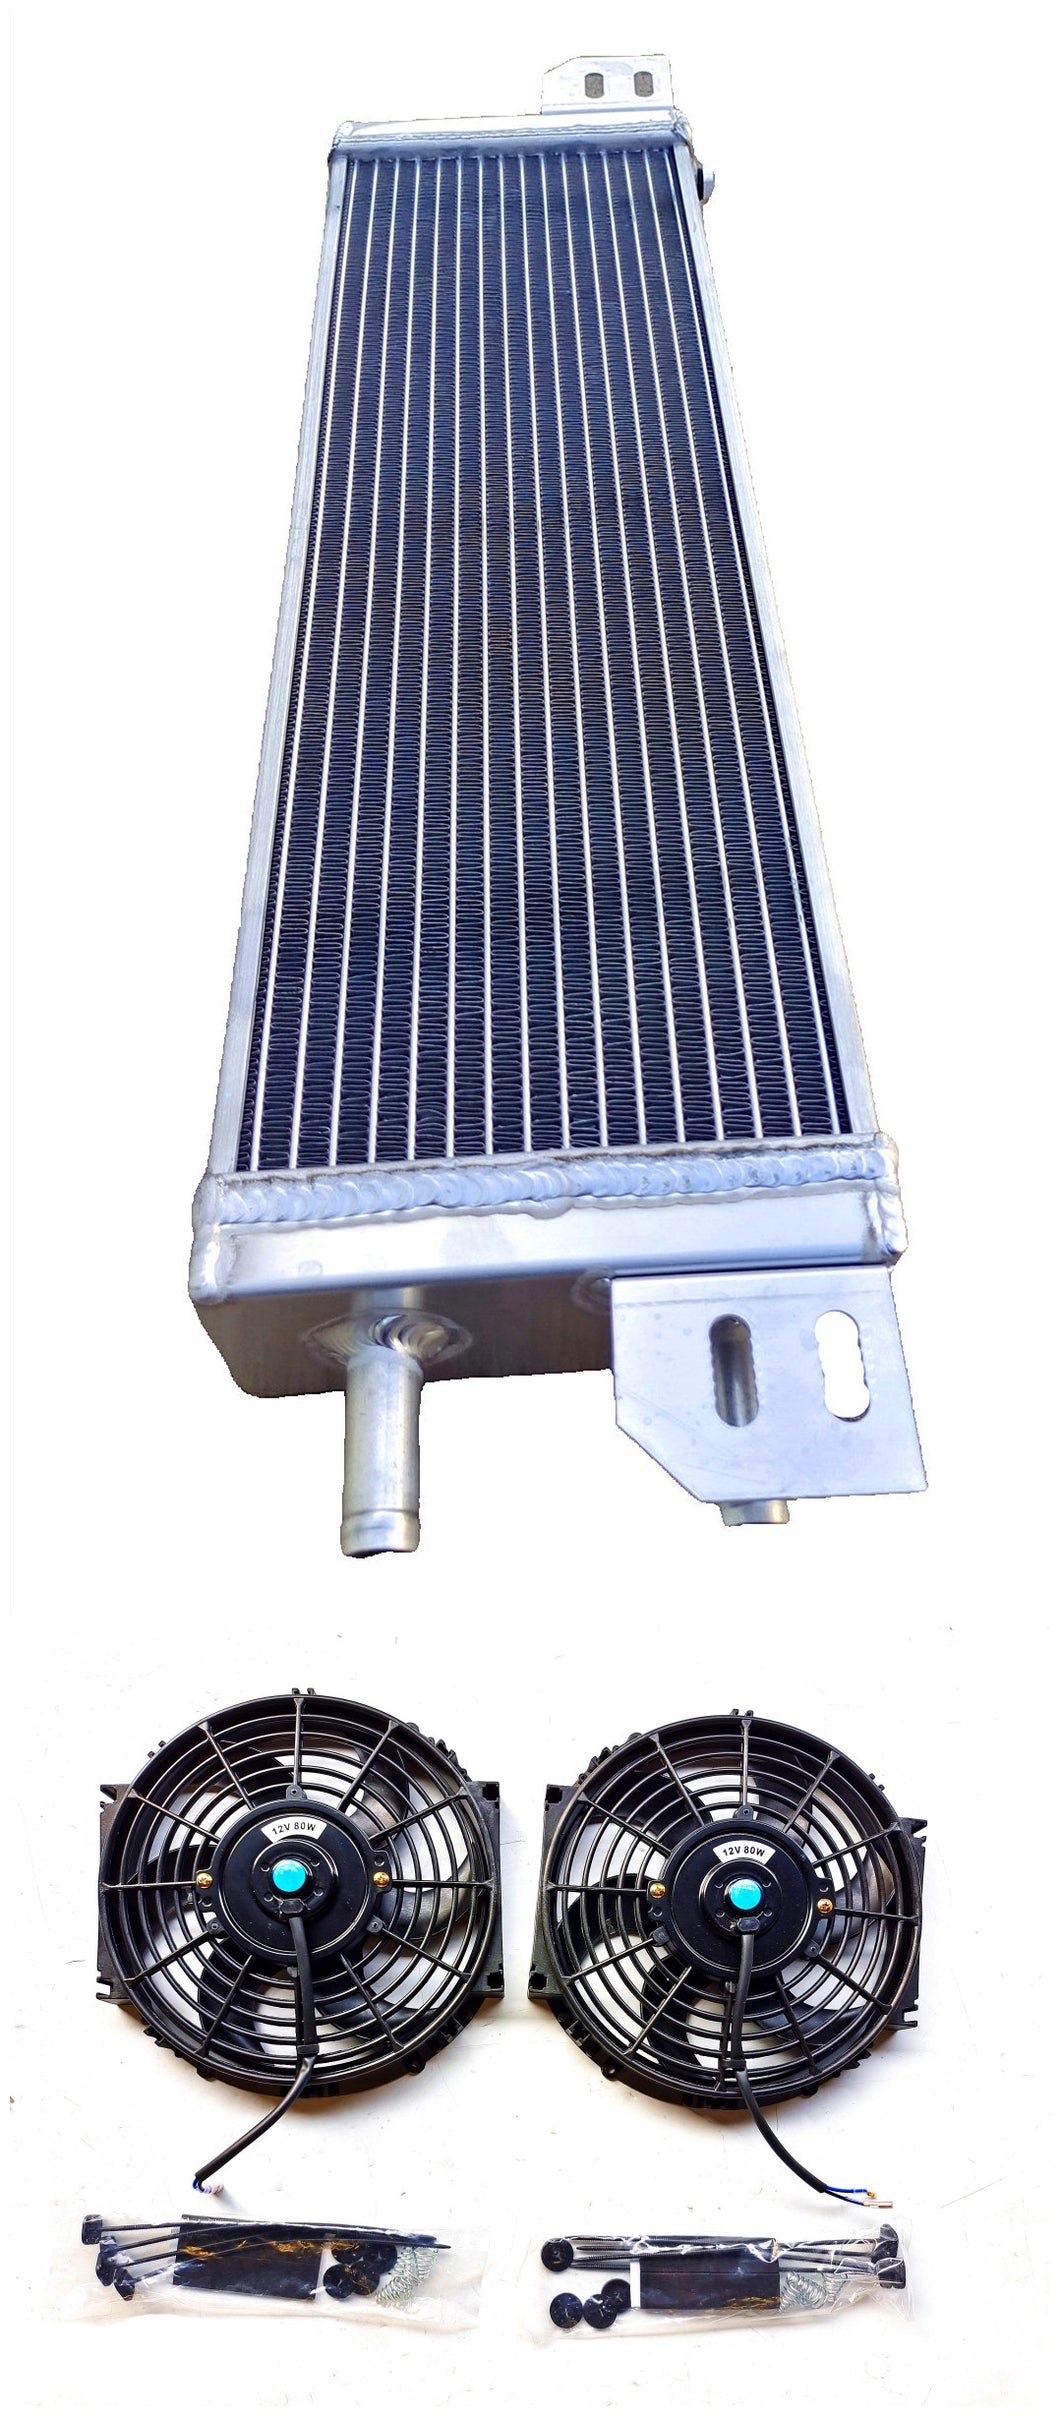 GPI Air to water aluminum intercooler liquid heat exchanger new & fans Overall Size: 23.5x6.75x2.75(end-tank) inch